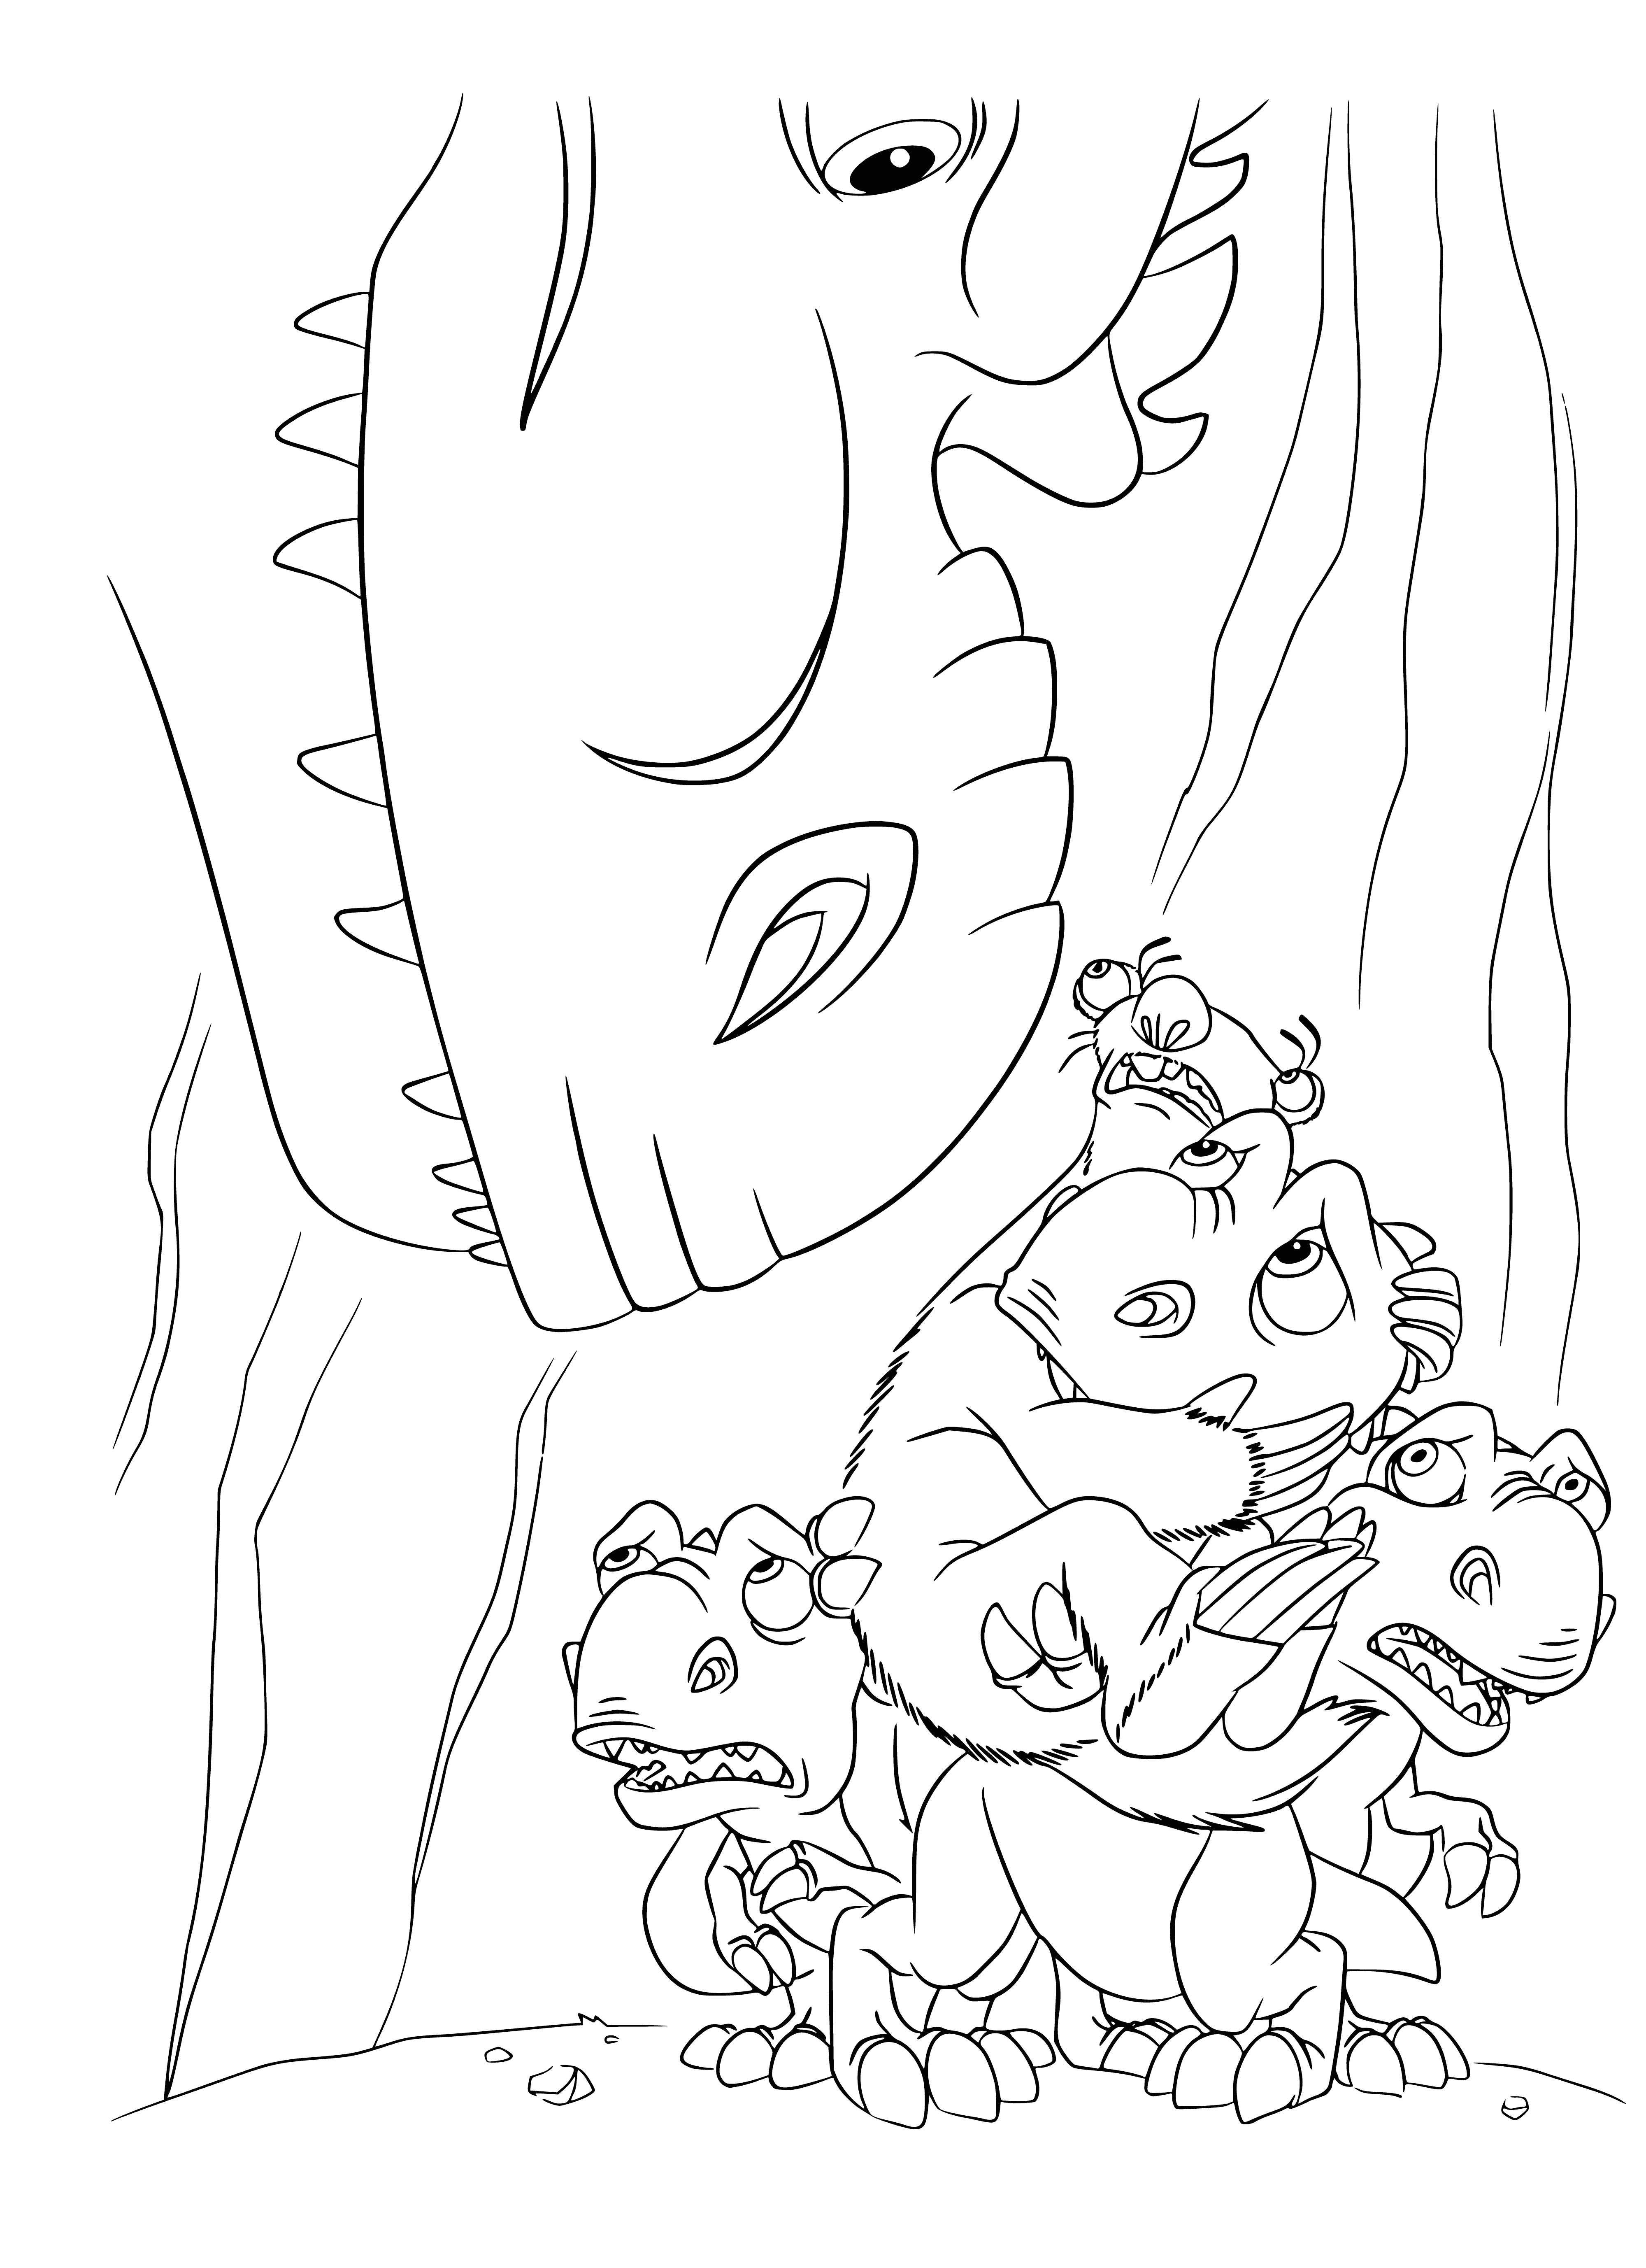 Dinosaurs and Sid coloring page